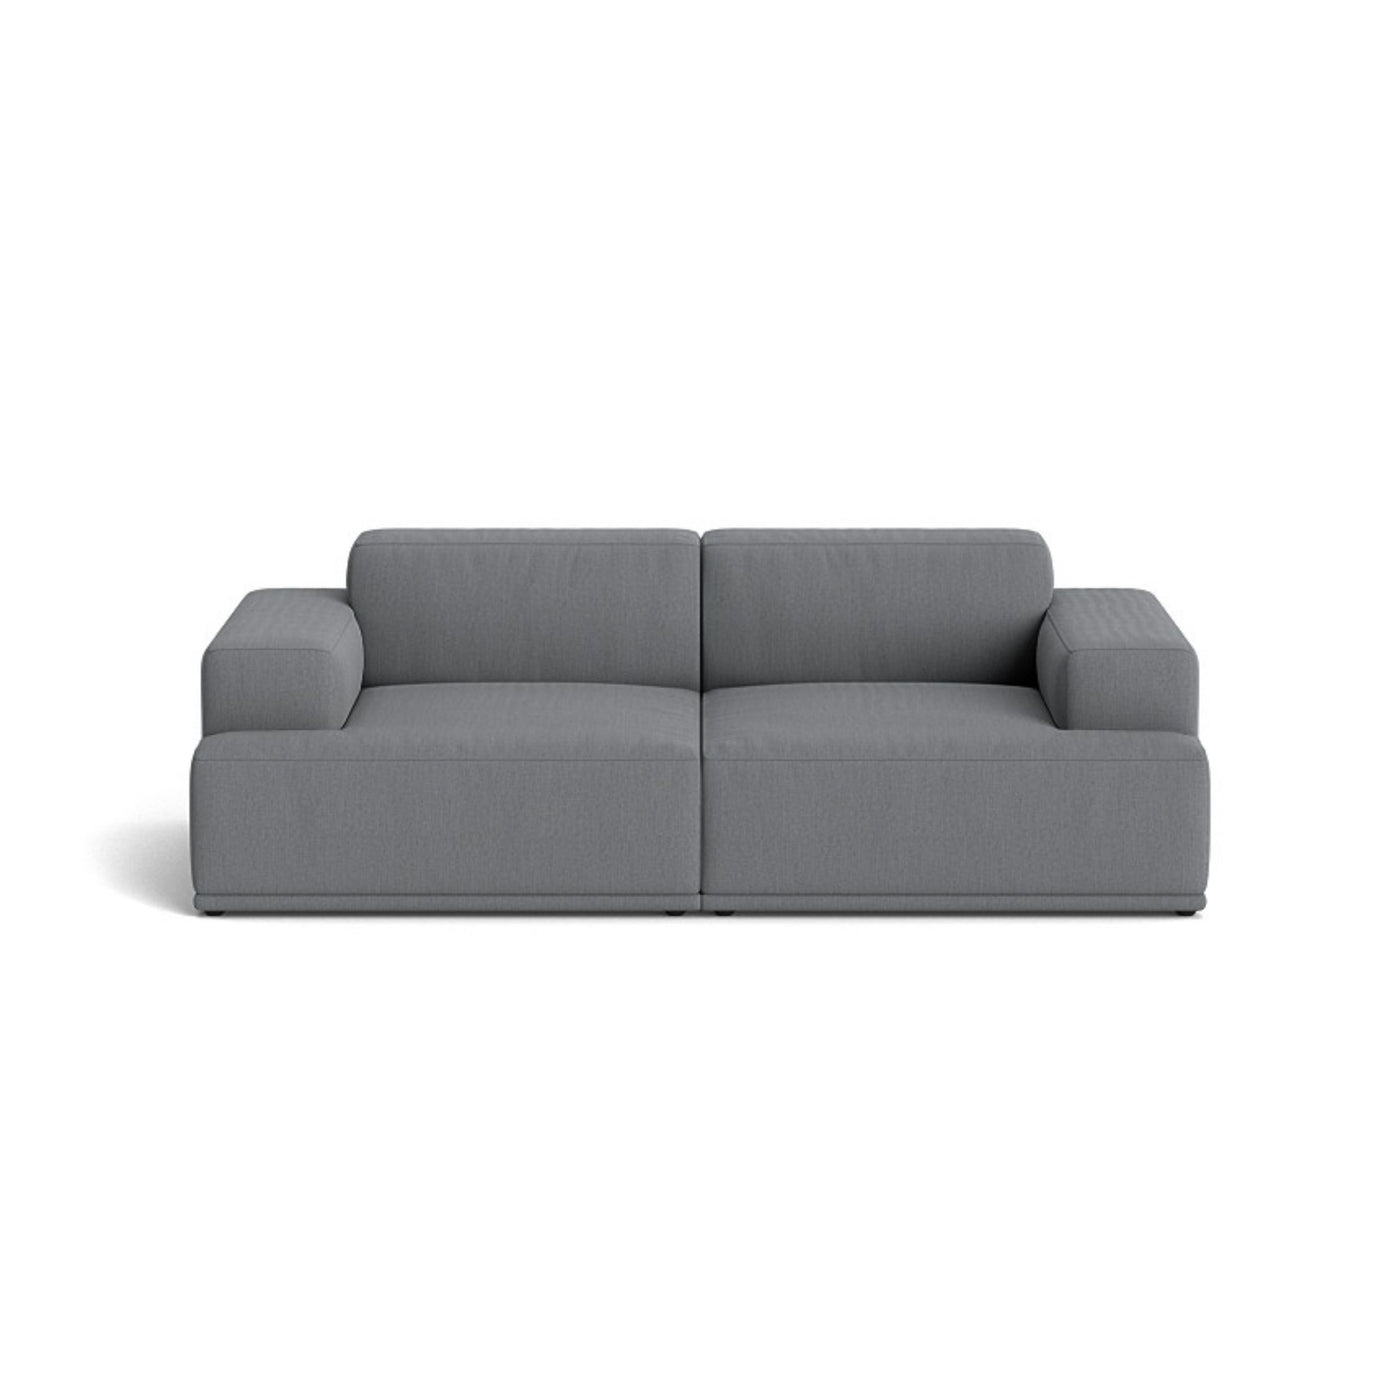 Muuto Connect Soft Modular 2 Seater Sofa, configuration 1. made-to-order from someday designs. #colour_re-wool-158